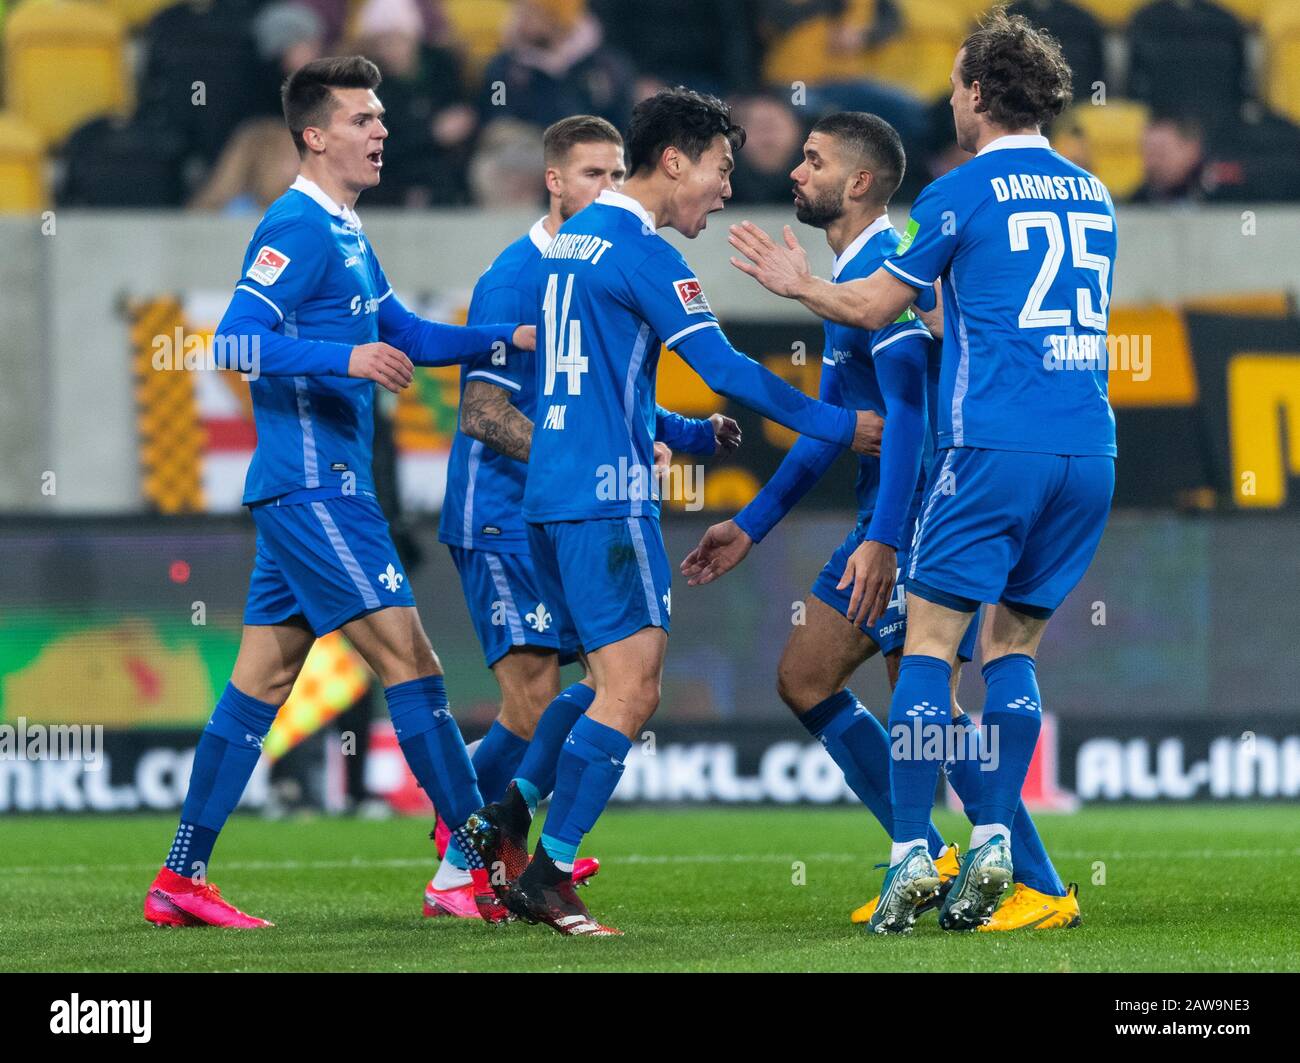 07 February 2020, Saxony, Dresden: Football: 2nd Bundesliga, SG Dynamo Dresden - SV Darmstadt 98, 21st matchday, at the Rudolf Harbig Stadium. Darmstadt's Seung-ho Paik (3rd from left) cheers after his goal for 1:1 with his team mates Victor Palsson (2nd from right), Yannick Stark (right), Tobias Kempe (2nd from left) and Mathias Honsak (left). Photo: Robert Michael/dpa-Zentralbild/dpa - IMPORTANT NOTE: In accordance with the regulations of the DFL Deutsche Fußball Liga and the DFB Deutscher Fußball-Bund, it is prohibited to exploit or have exploited in the stadium and/or from the game taken p Stock Photo